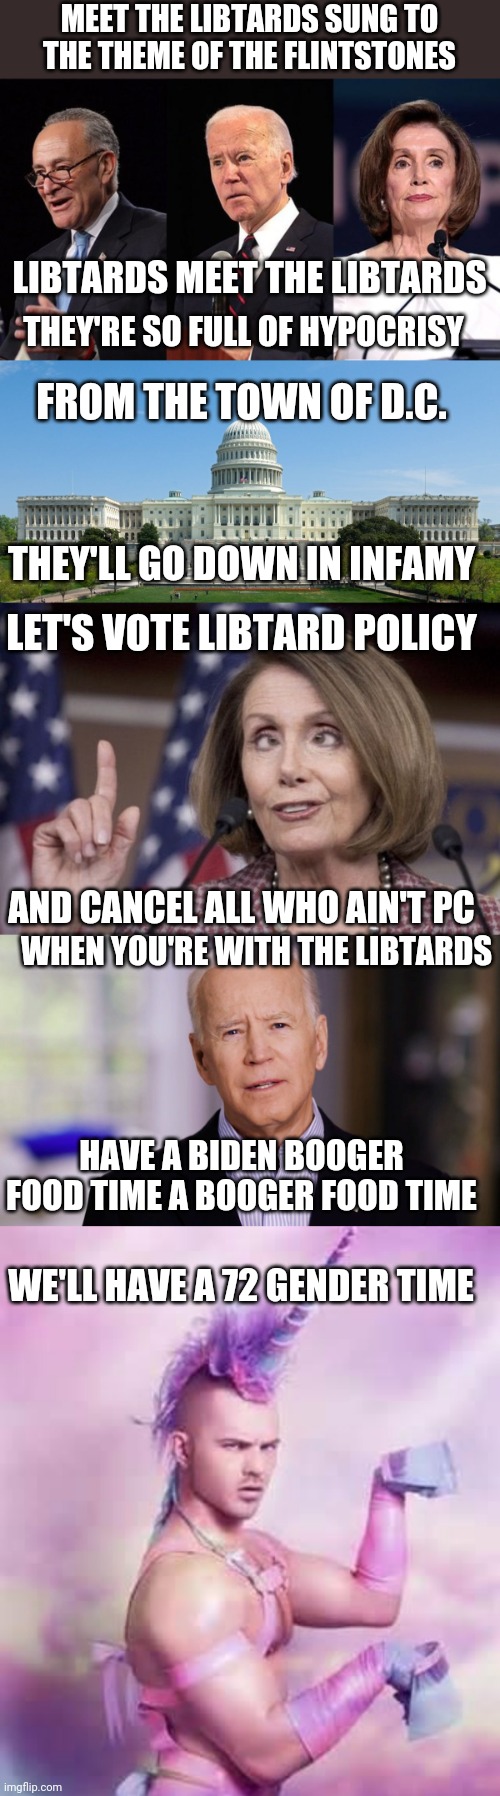 MEET THE LIBTARDS SUNG TO THE THEME OF THE FLINTSTONES; LIBTARDS MEET THE LIBTARDS; THEY'RE SO FULL OF HYPOCRISY; FROM THE TOWN OF D.C. THEY'LL GO DOWN IN INFAMY; LET'S VOTE LIBTARD POLICY; AND CANCEL ALL WHO AIN'T PC; WHEN YOU'RE WITH THE LIBTARDS; HAVE A BIDEN BOOGER FOOD TIME A BOOGER FOOD TIME; WE'LL HAVE A 72 GENDER TIME | image tagged in biden schumer pelosi,capitol hill,nancy pelosi,joe biden 2020,gay unicorn | made w/ Imgflip meme maker